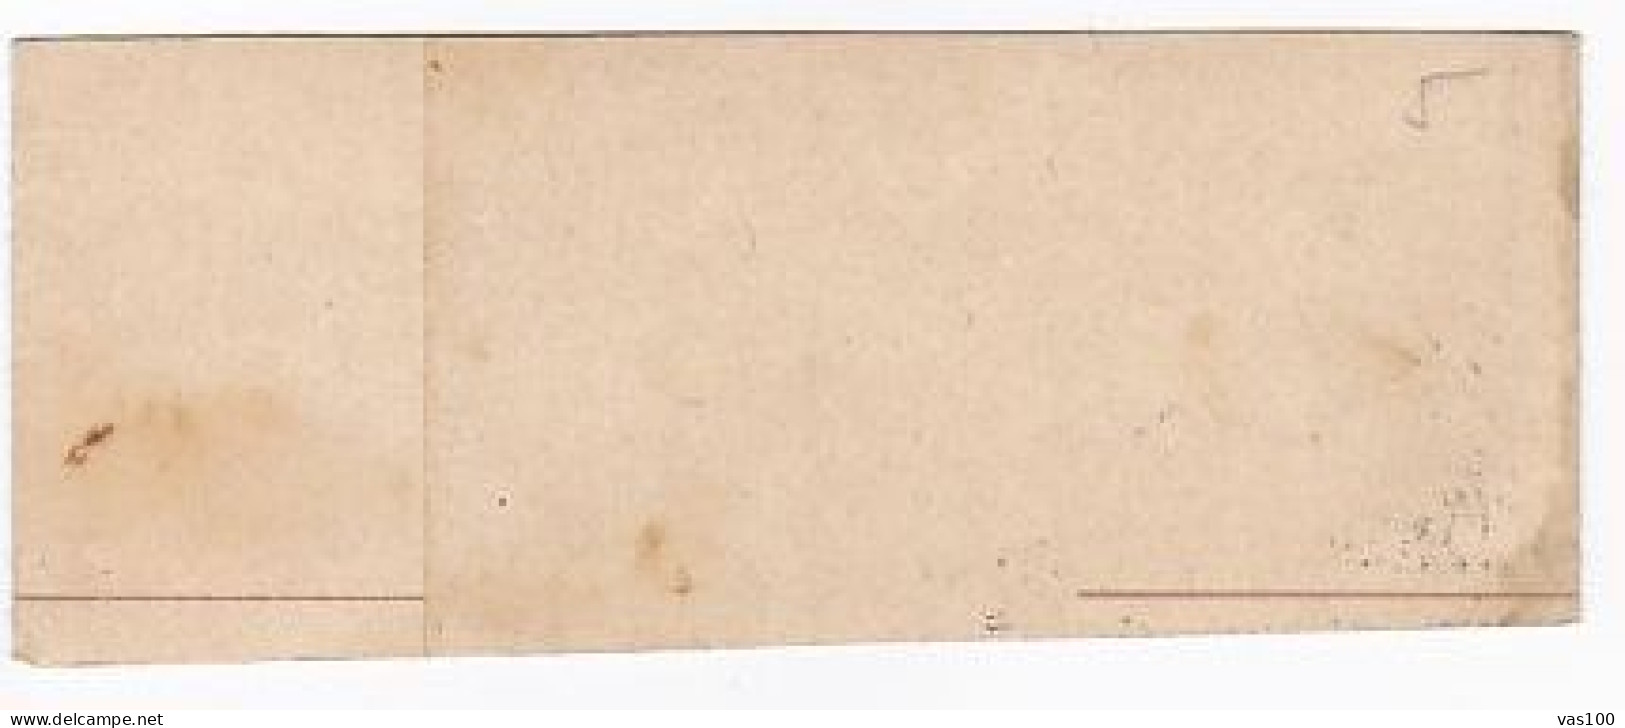 KING CAROL I NEWSPAPER WRAPPING STATIONERY, ENTIER POSTAL, 1889, ROMANIA - Covers & Documents